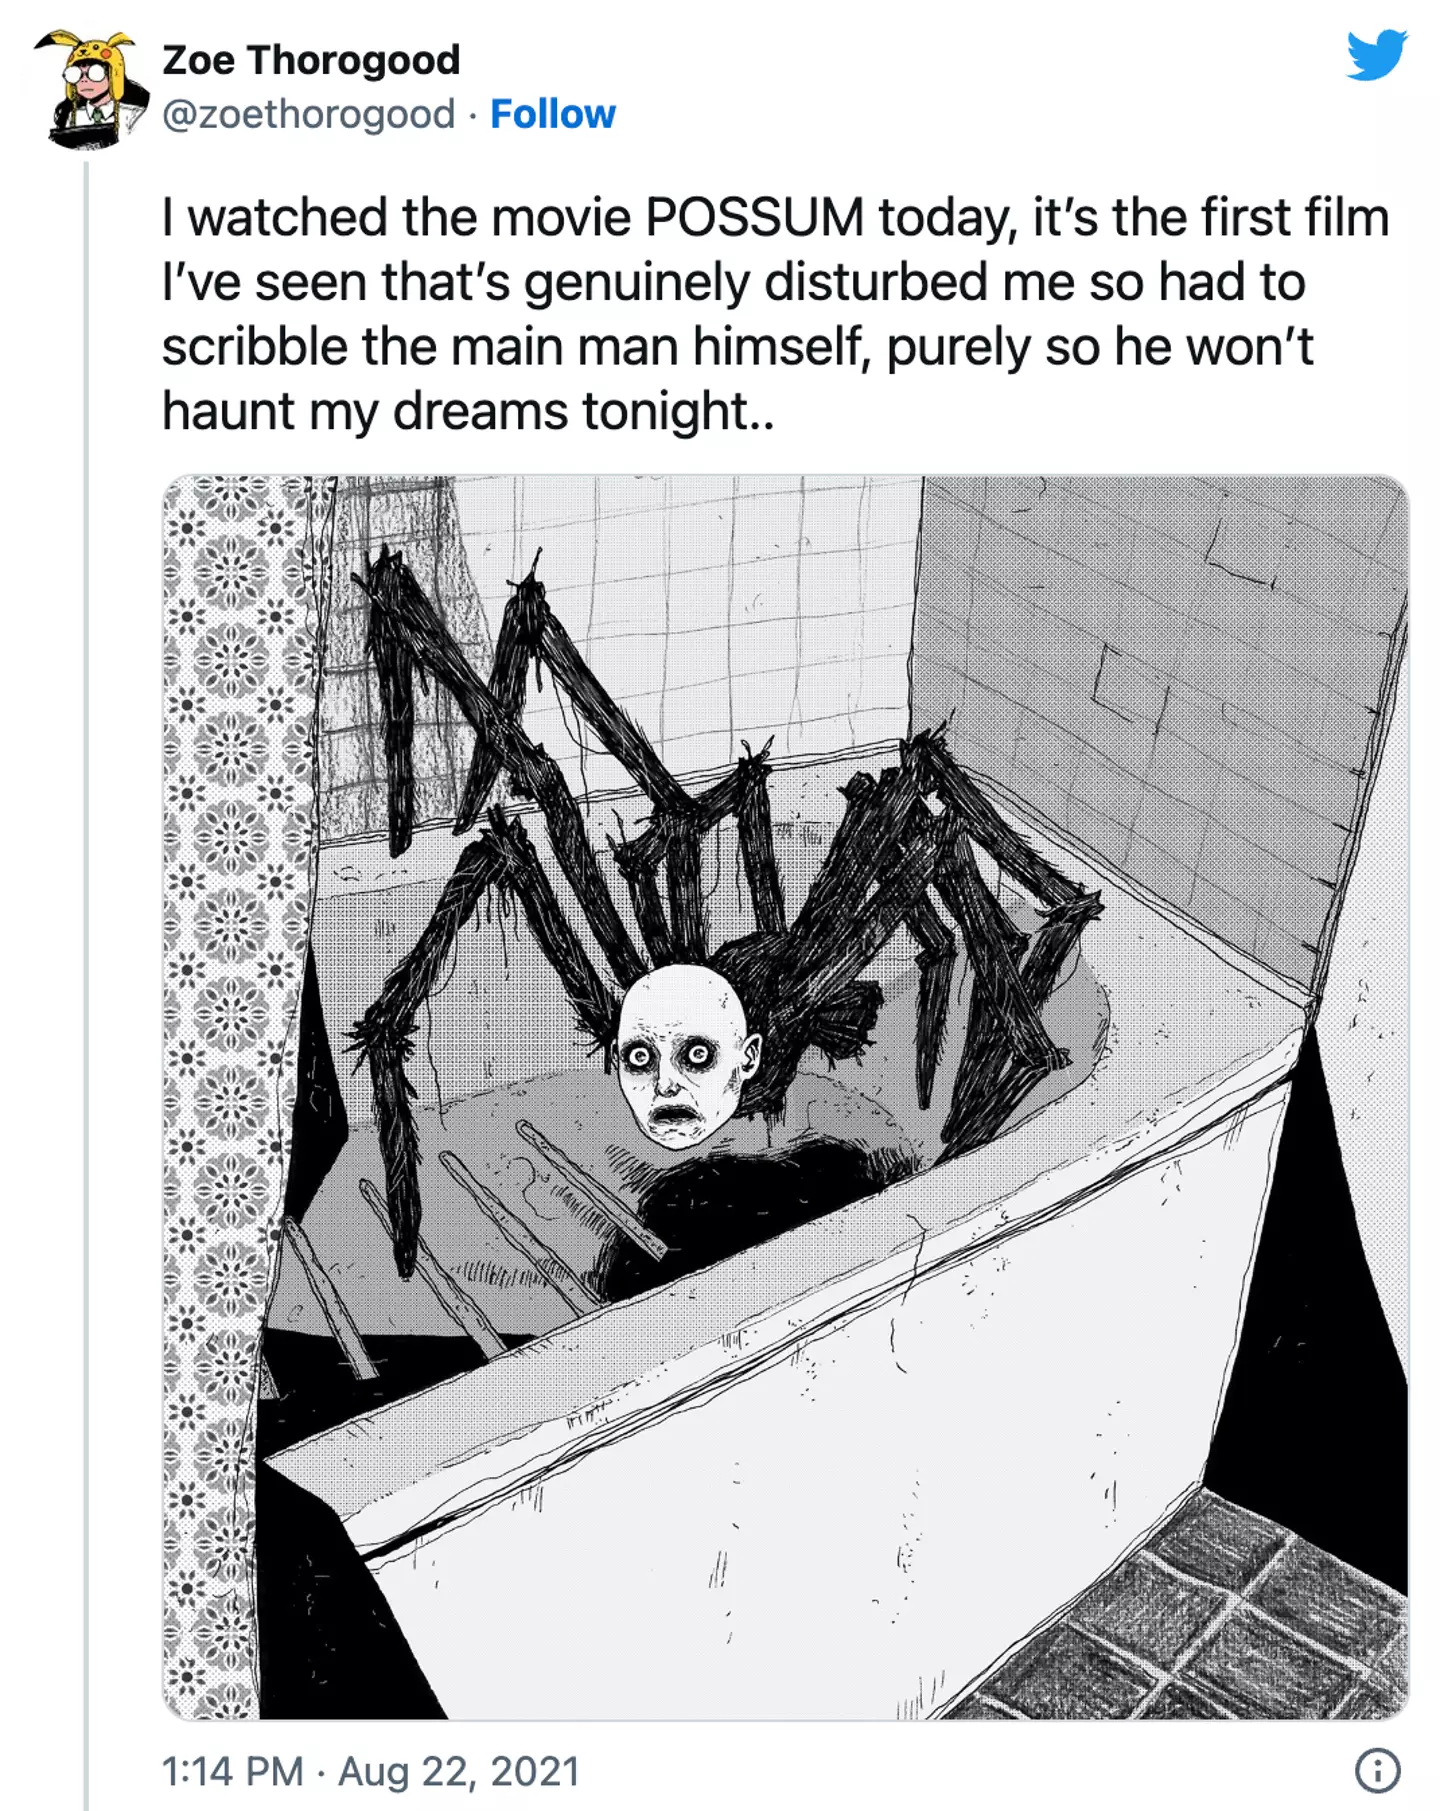 One viewer drew an image of the spider puppet to try and get it out of their mind.